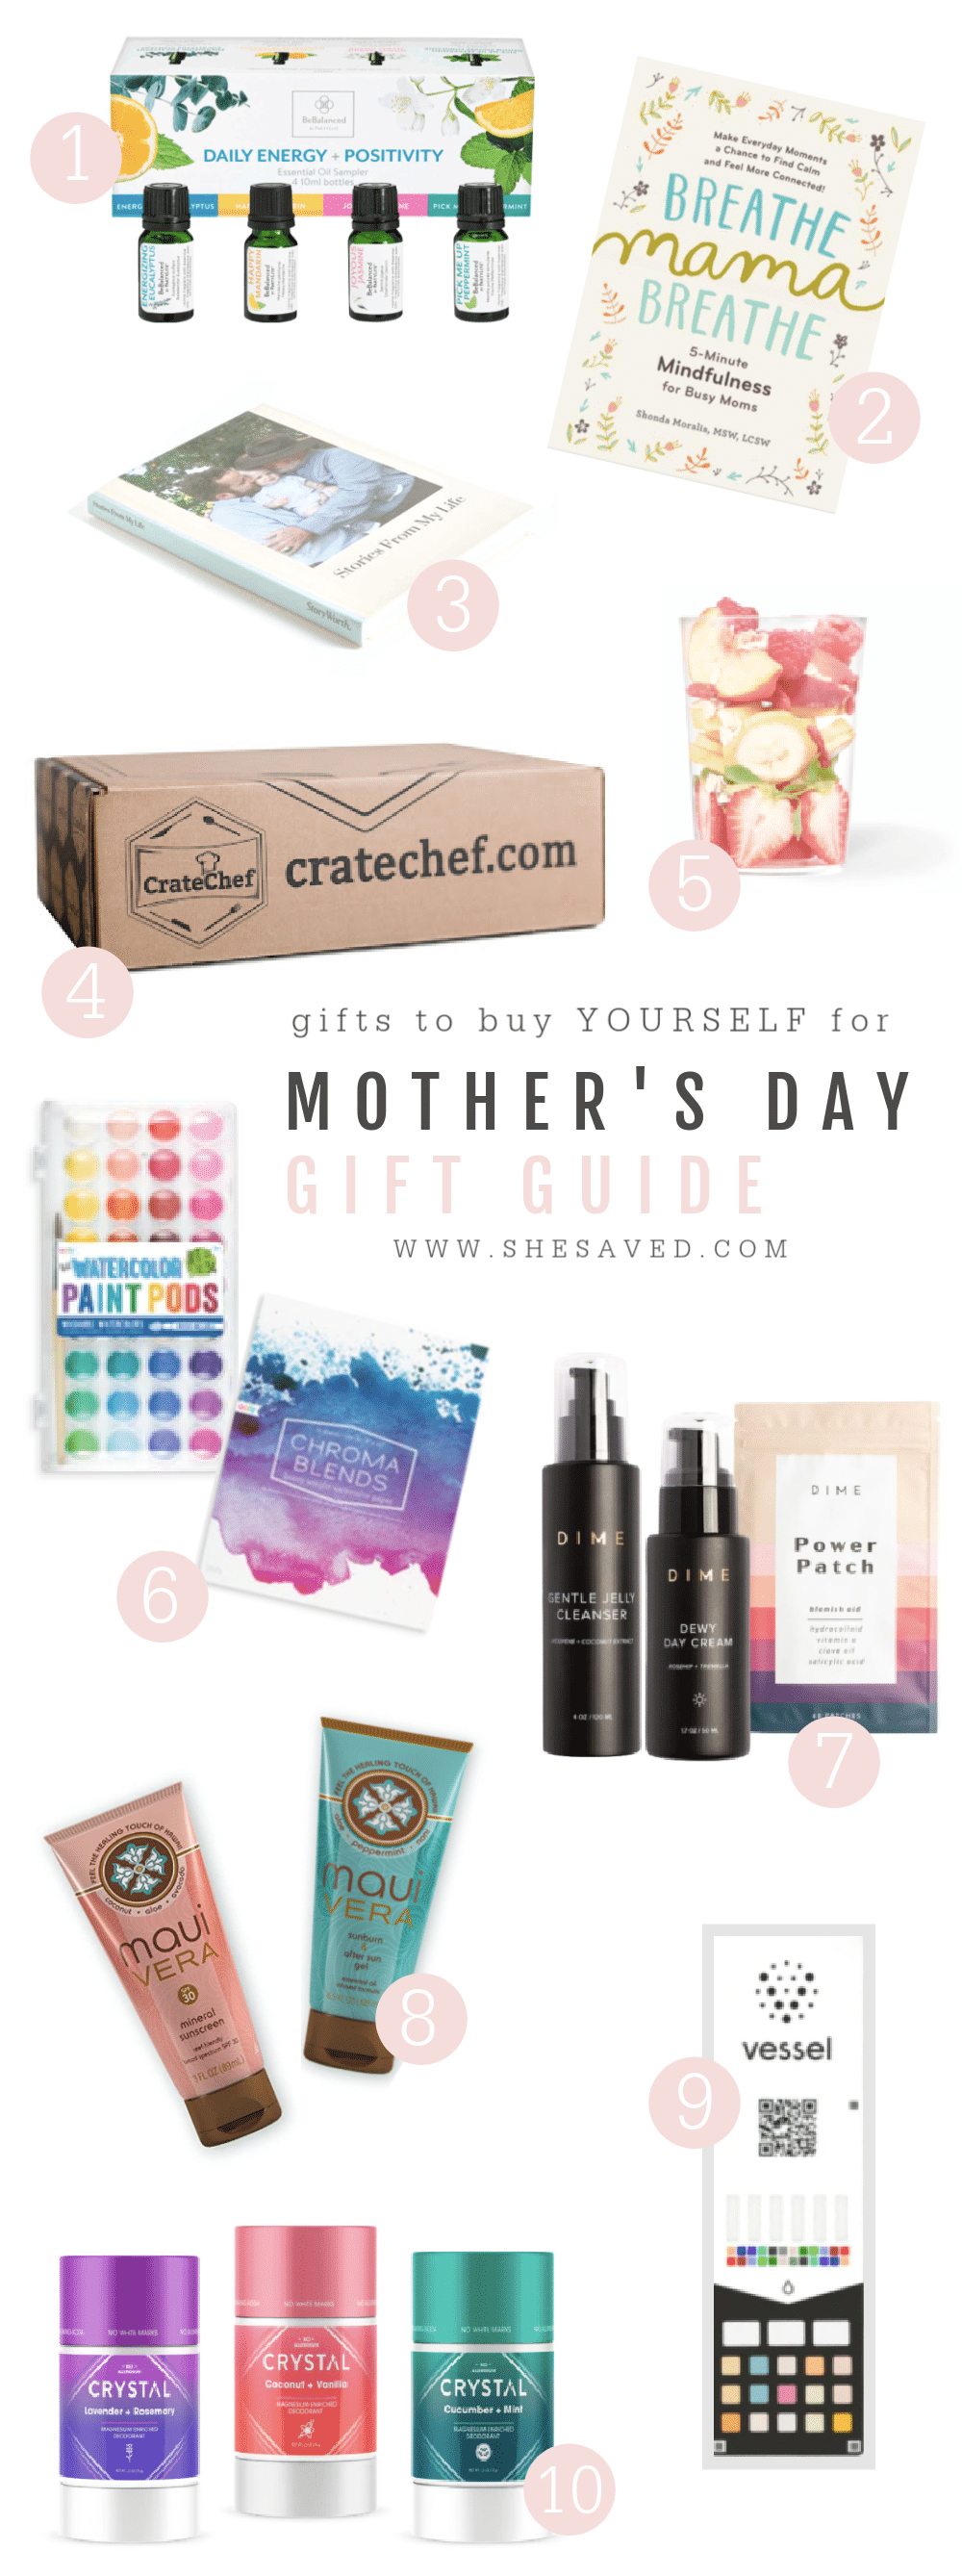 assortment of gifts for moms